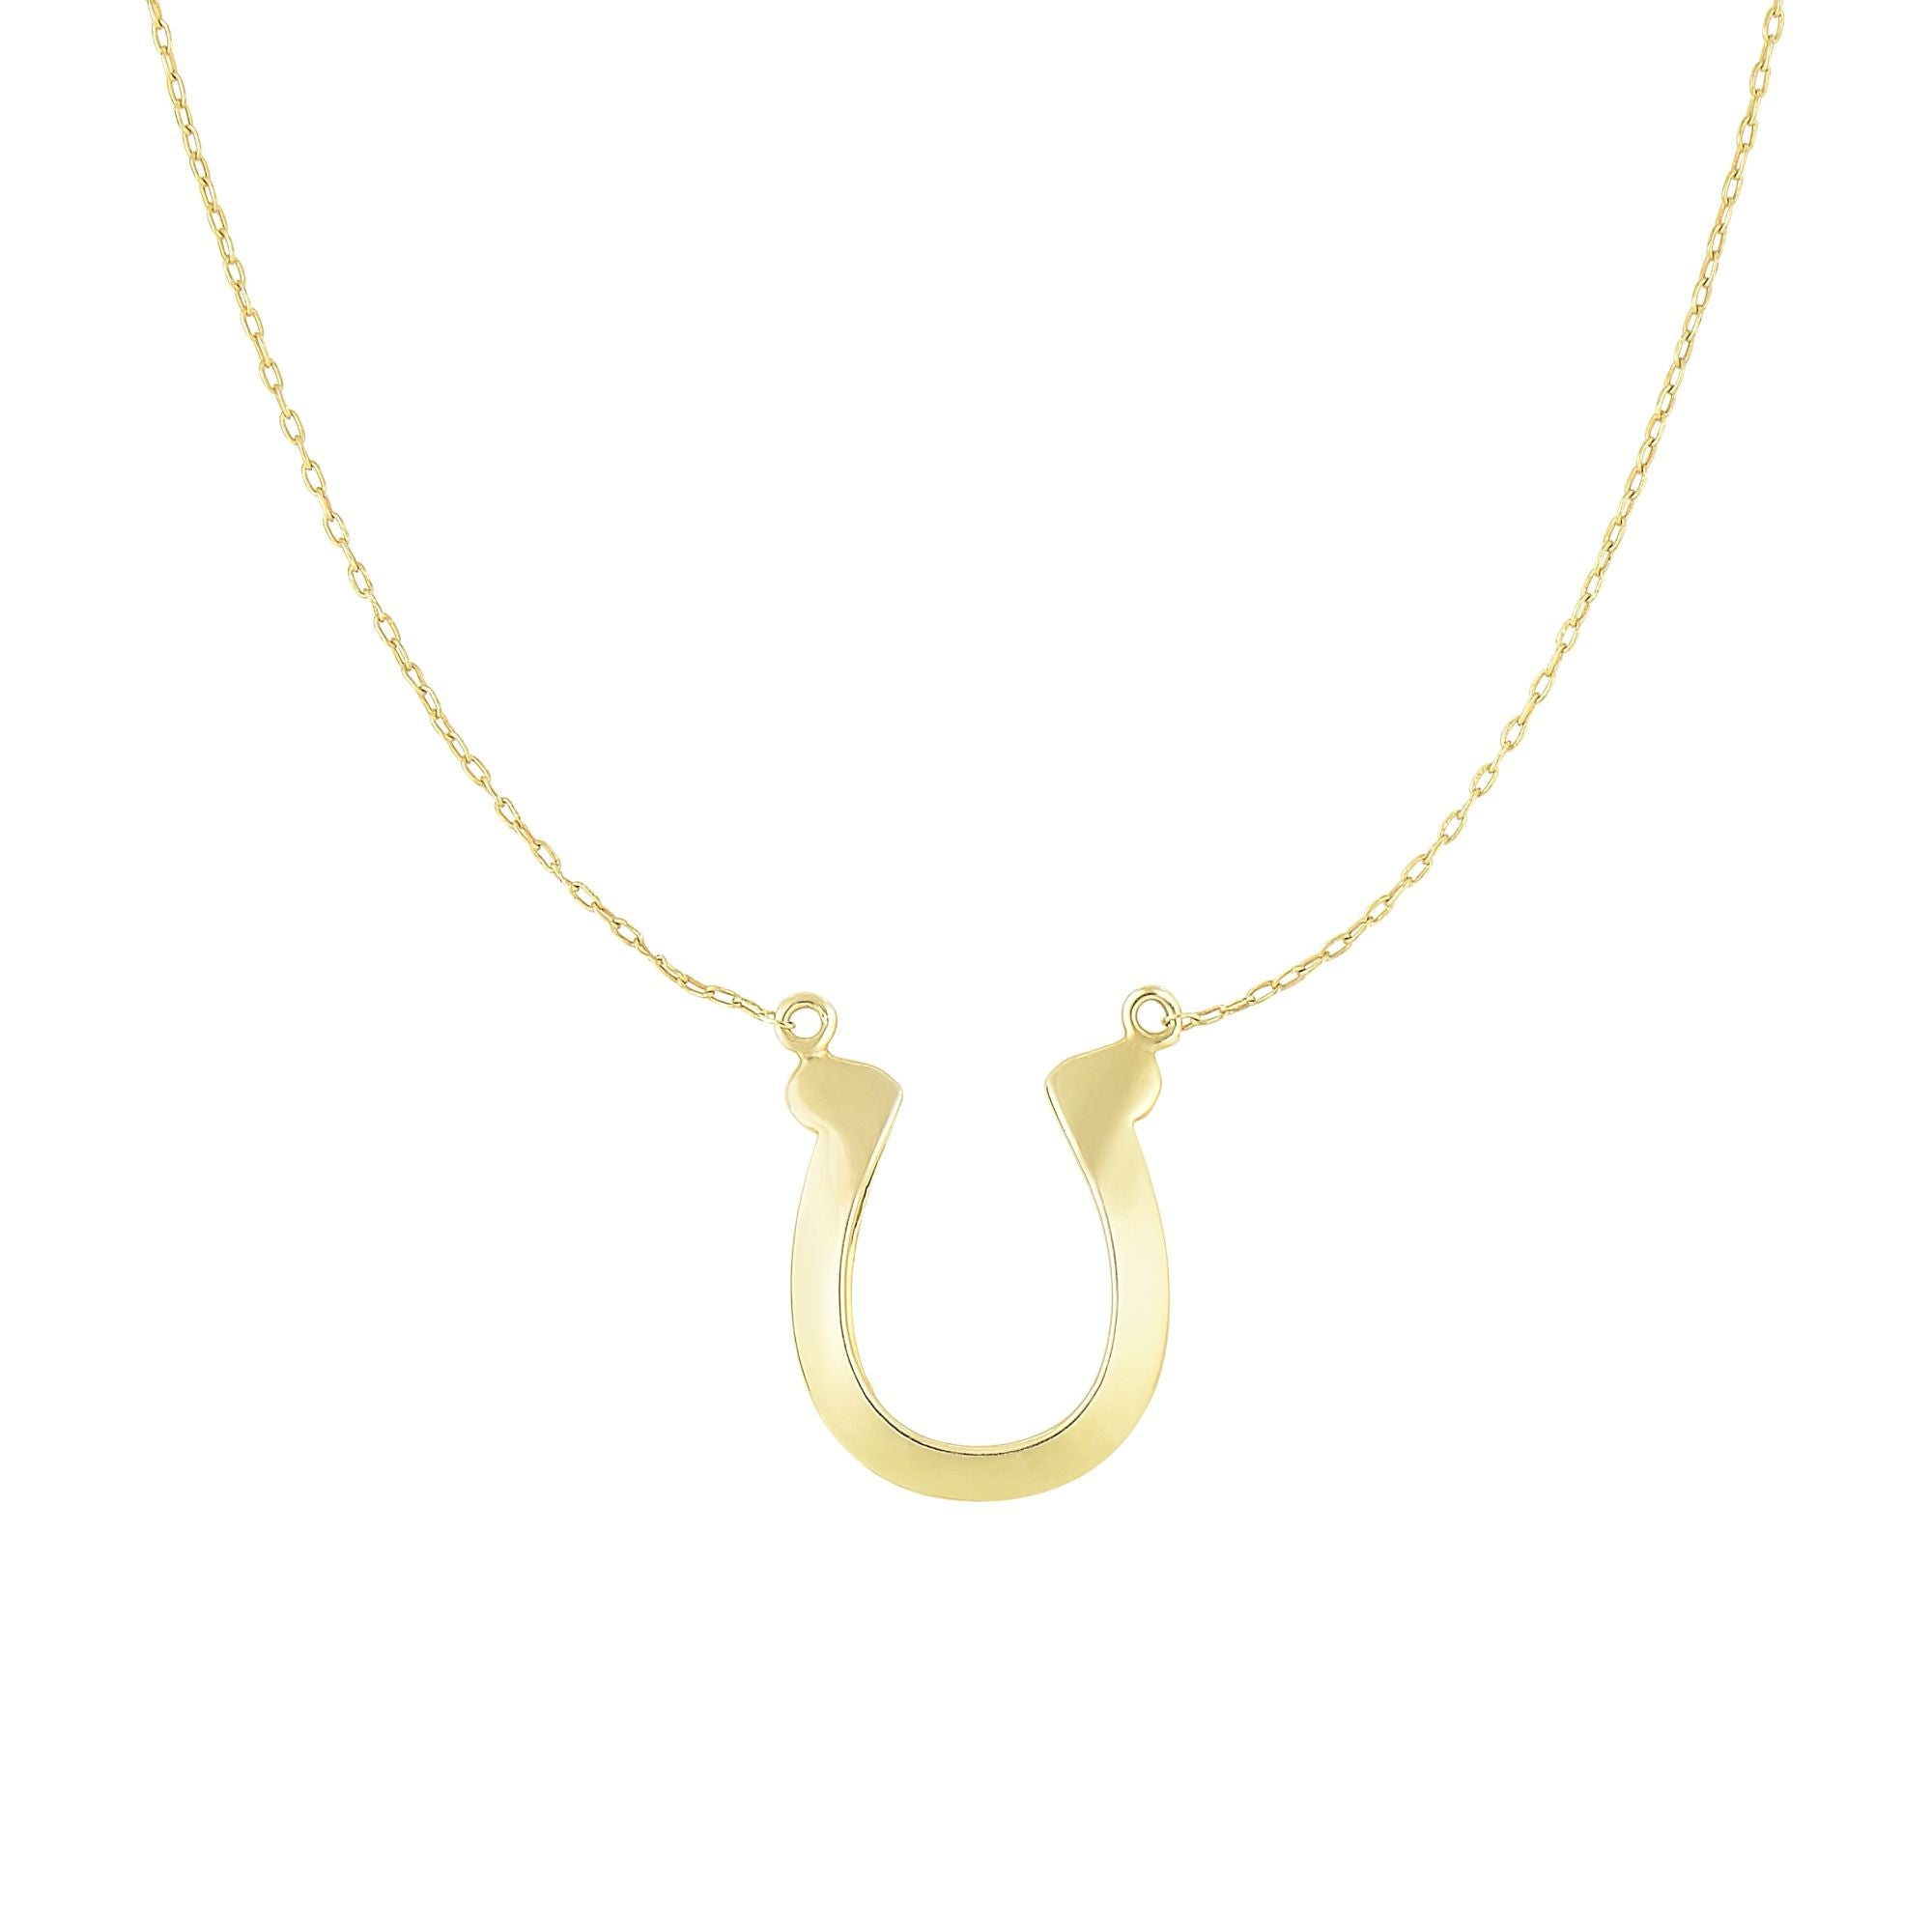 Minimalist Solid Gold Good Luck Horse Shoe Necklace - wingroupjewelry